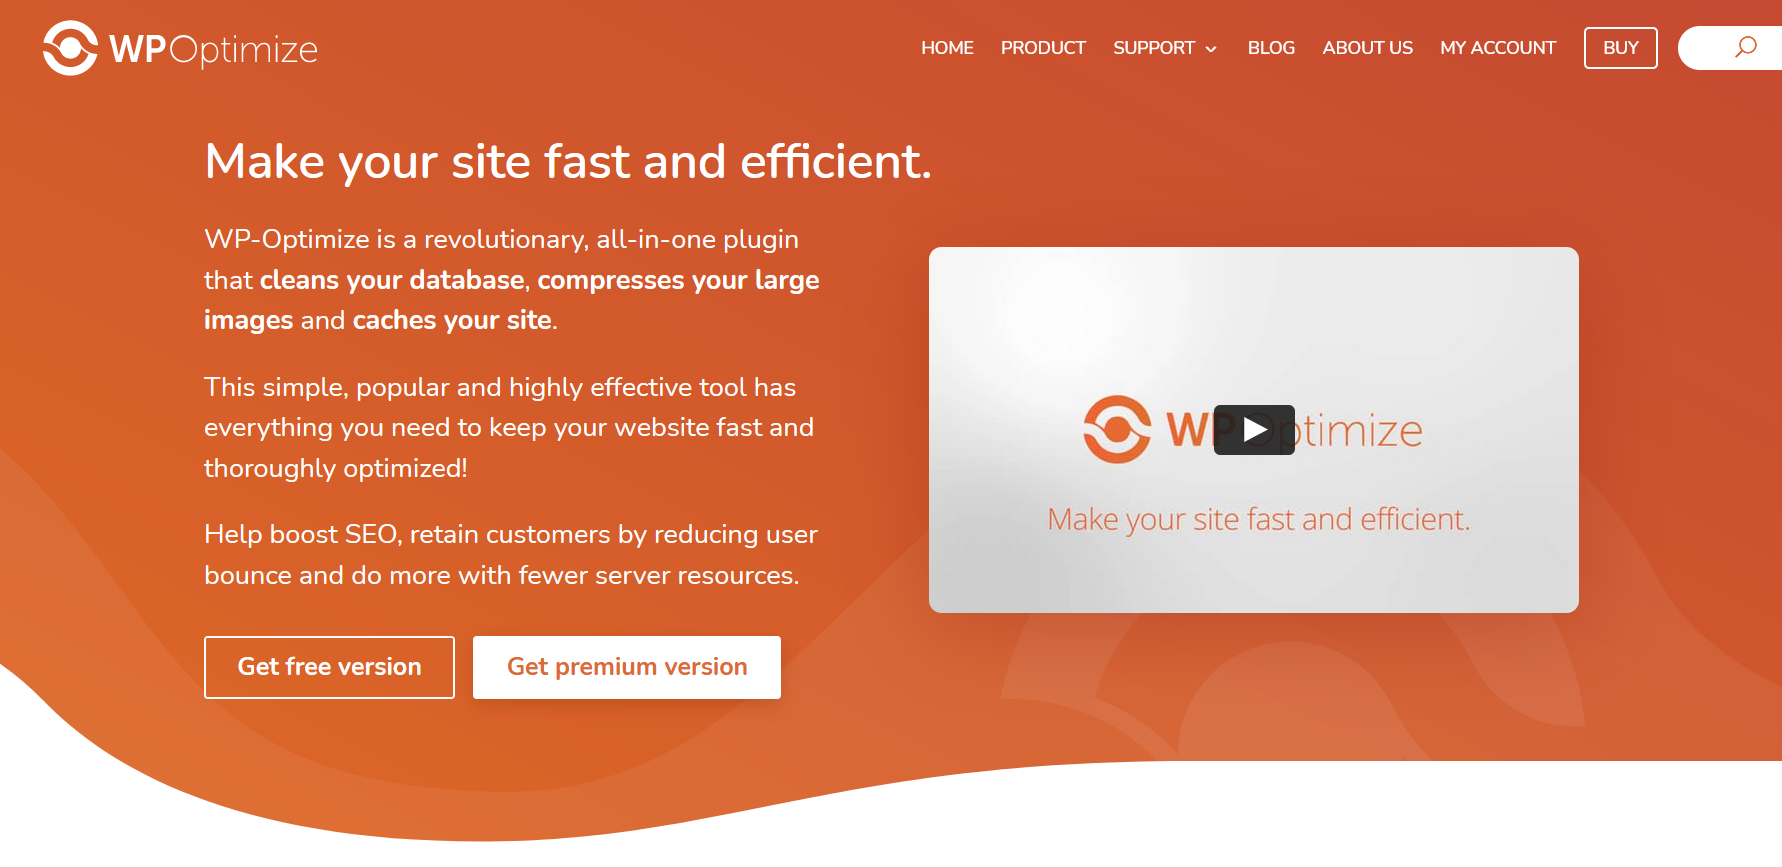 wp-optimize plugin to make your site fast and efficient